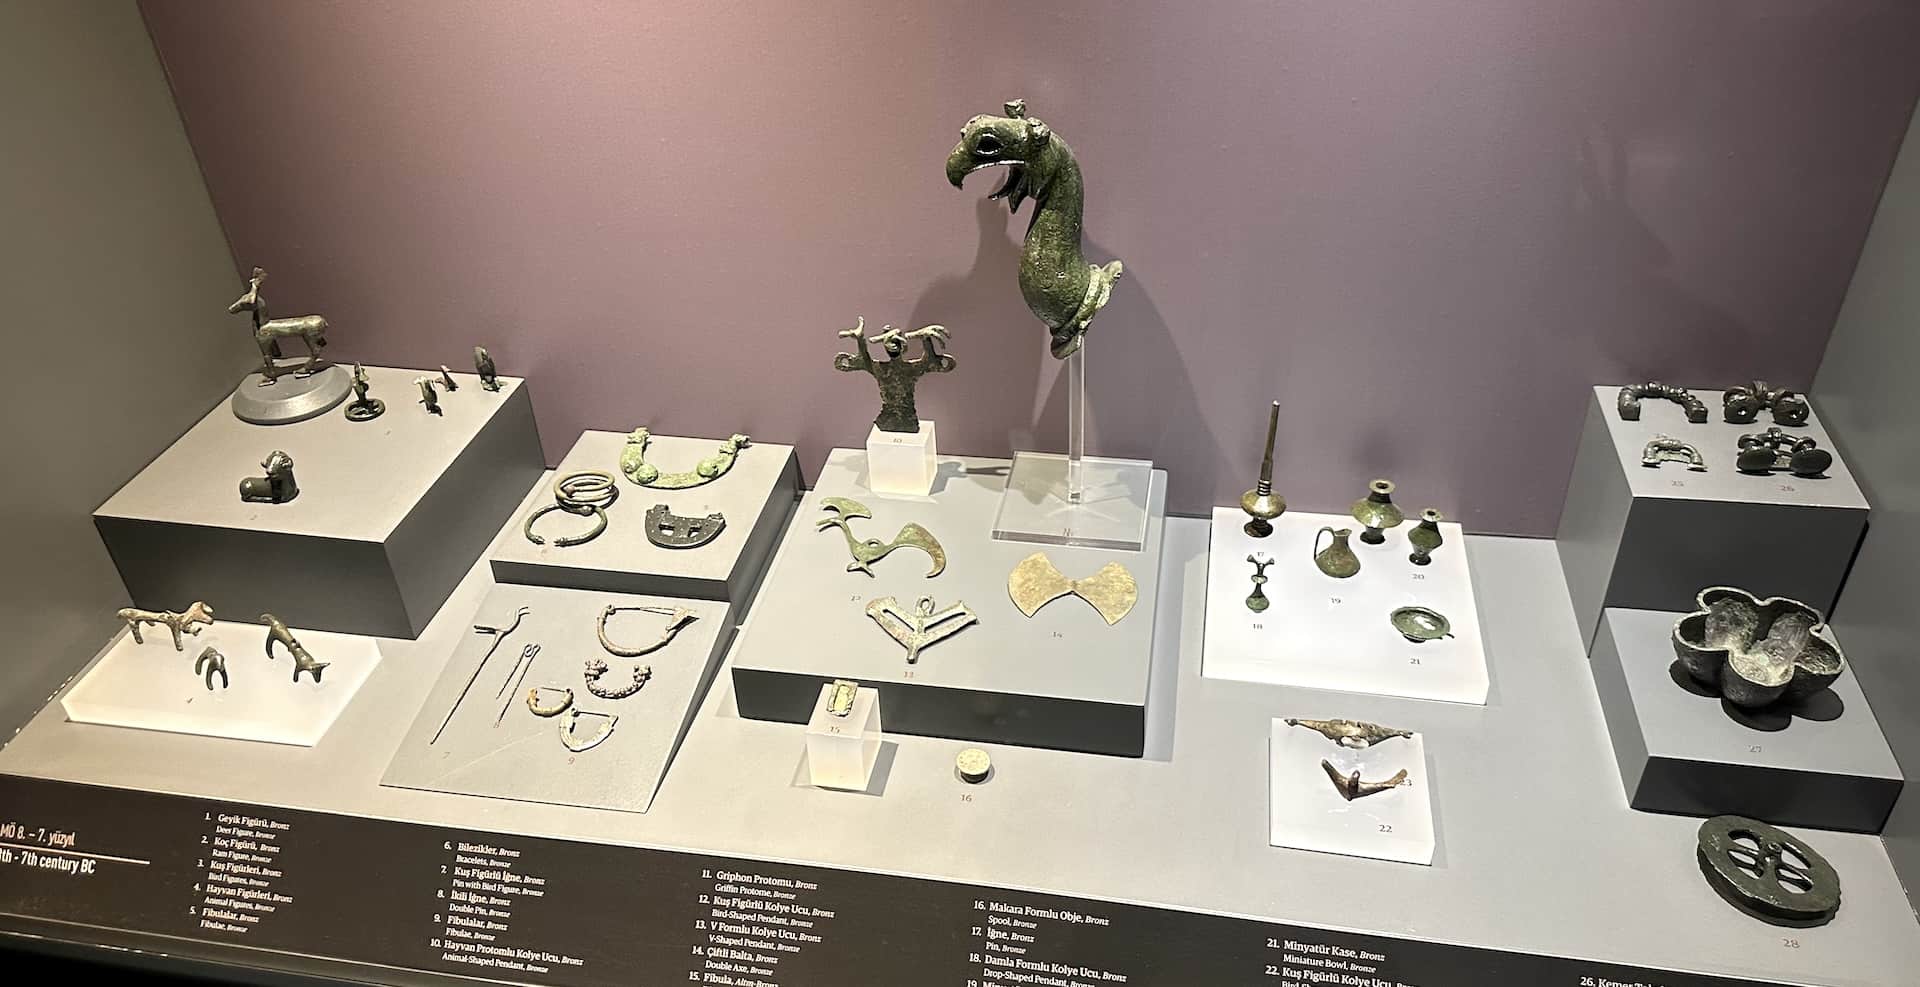 Figurines, pendants, and pins (8th-7th century BC) in Finds from the Temple of Artemis